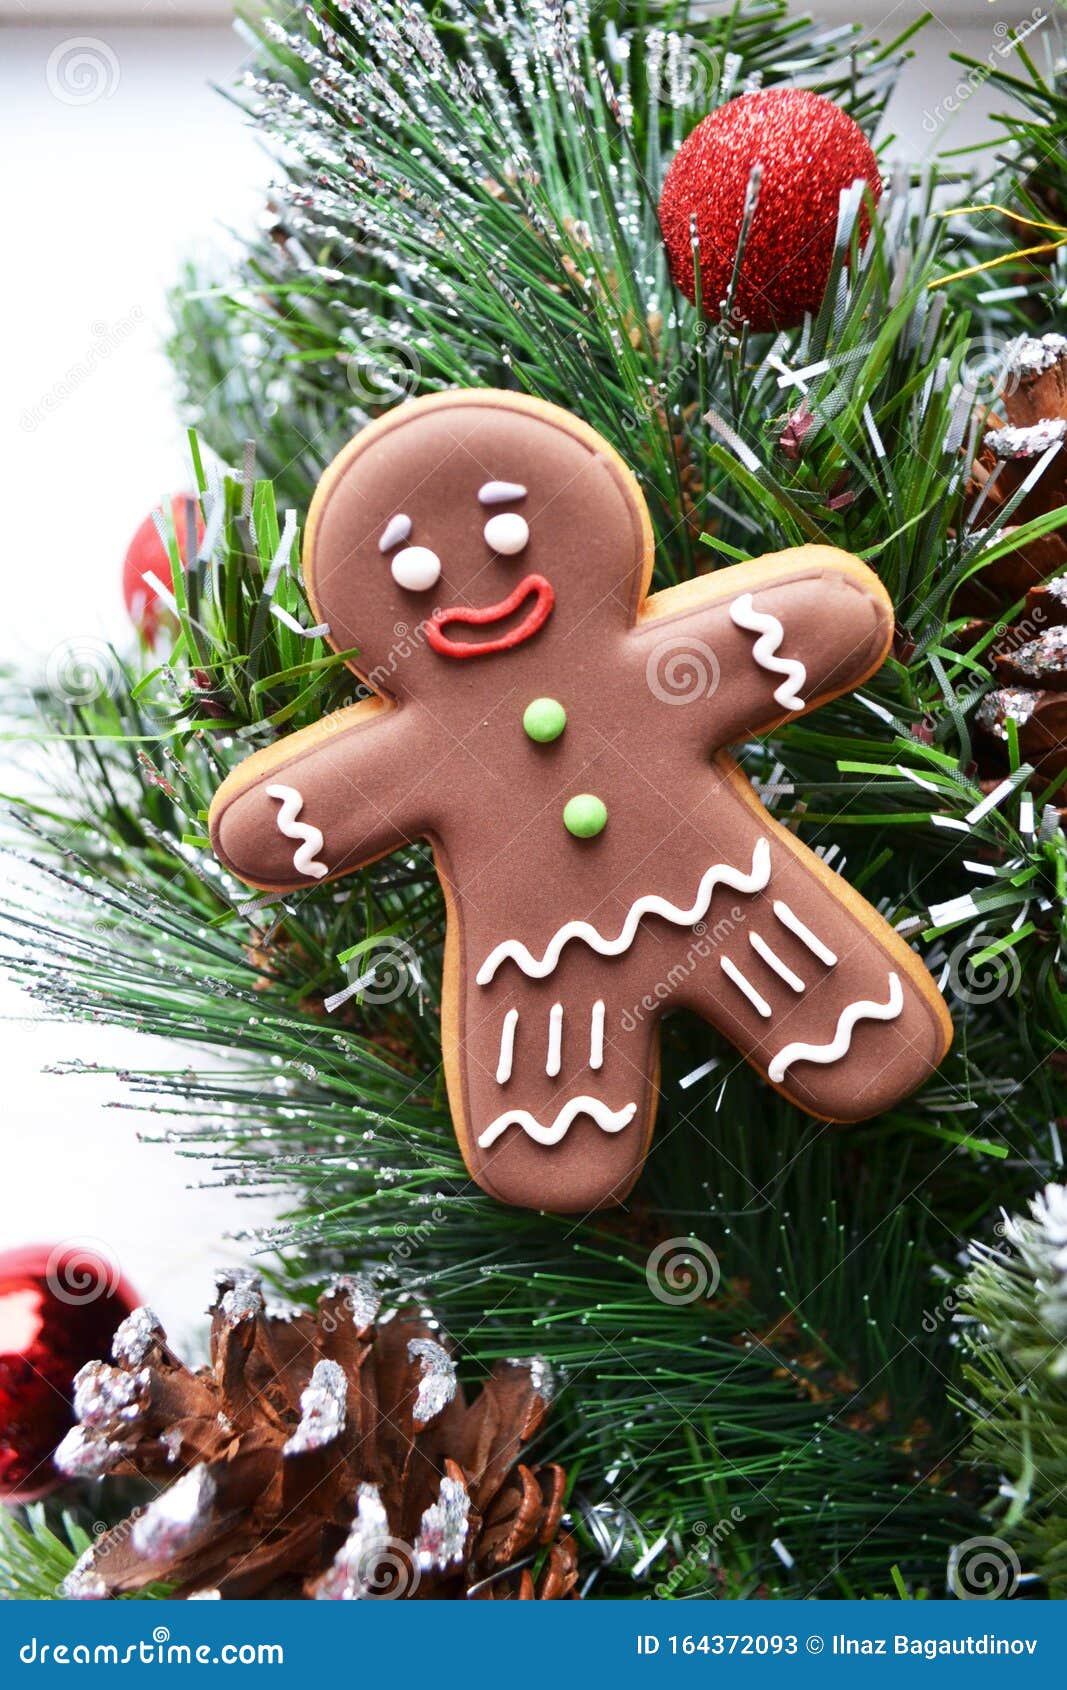 Gingerbread Man with Red Christmas Decorations Stock Image - Image ...